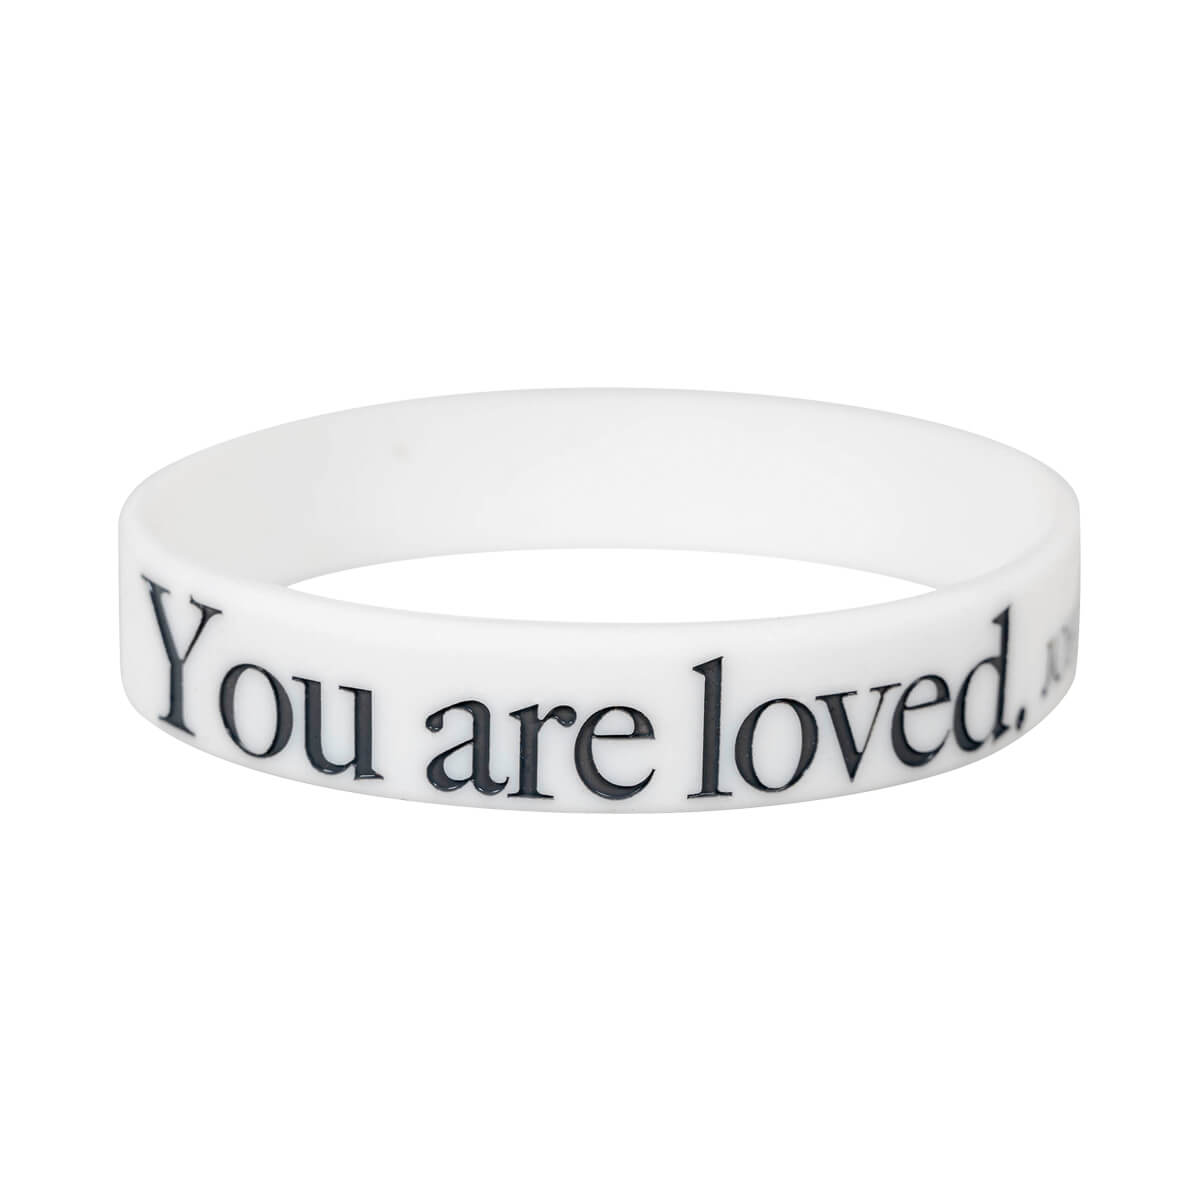 Armband You are loved - weiß